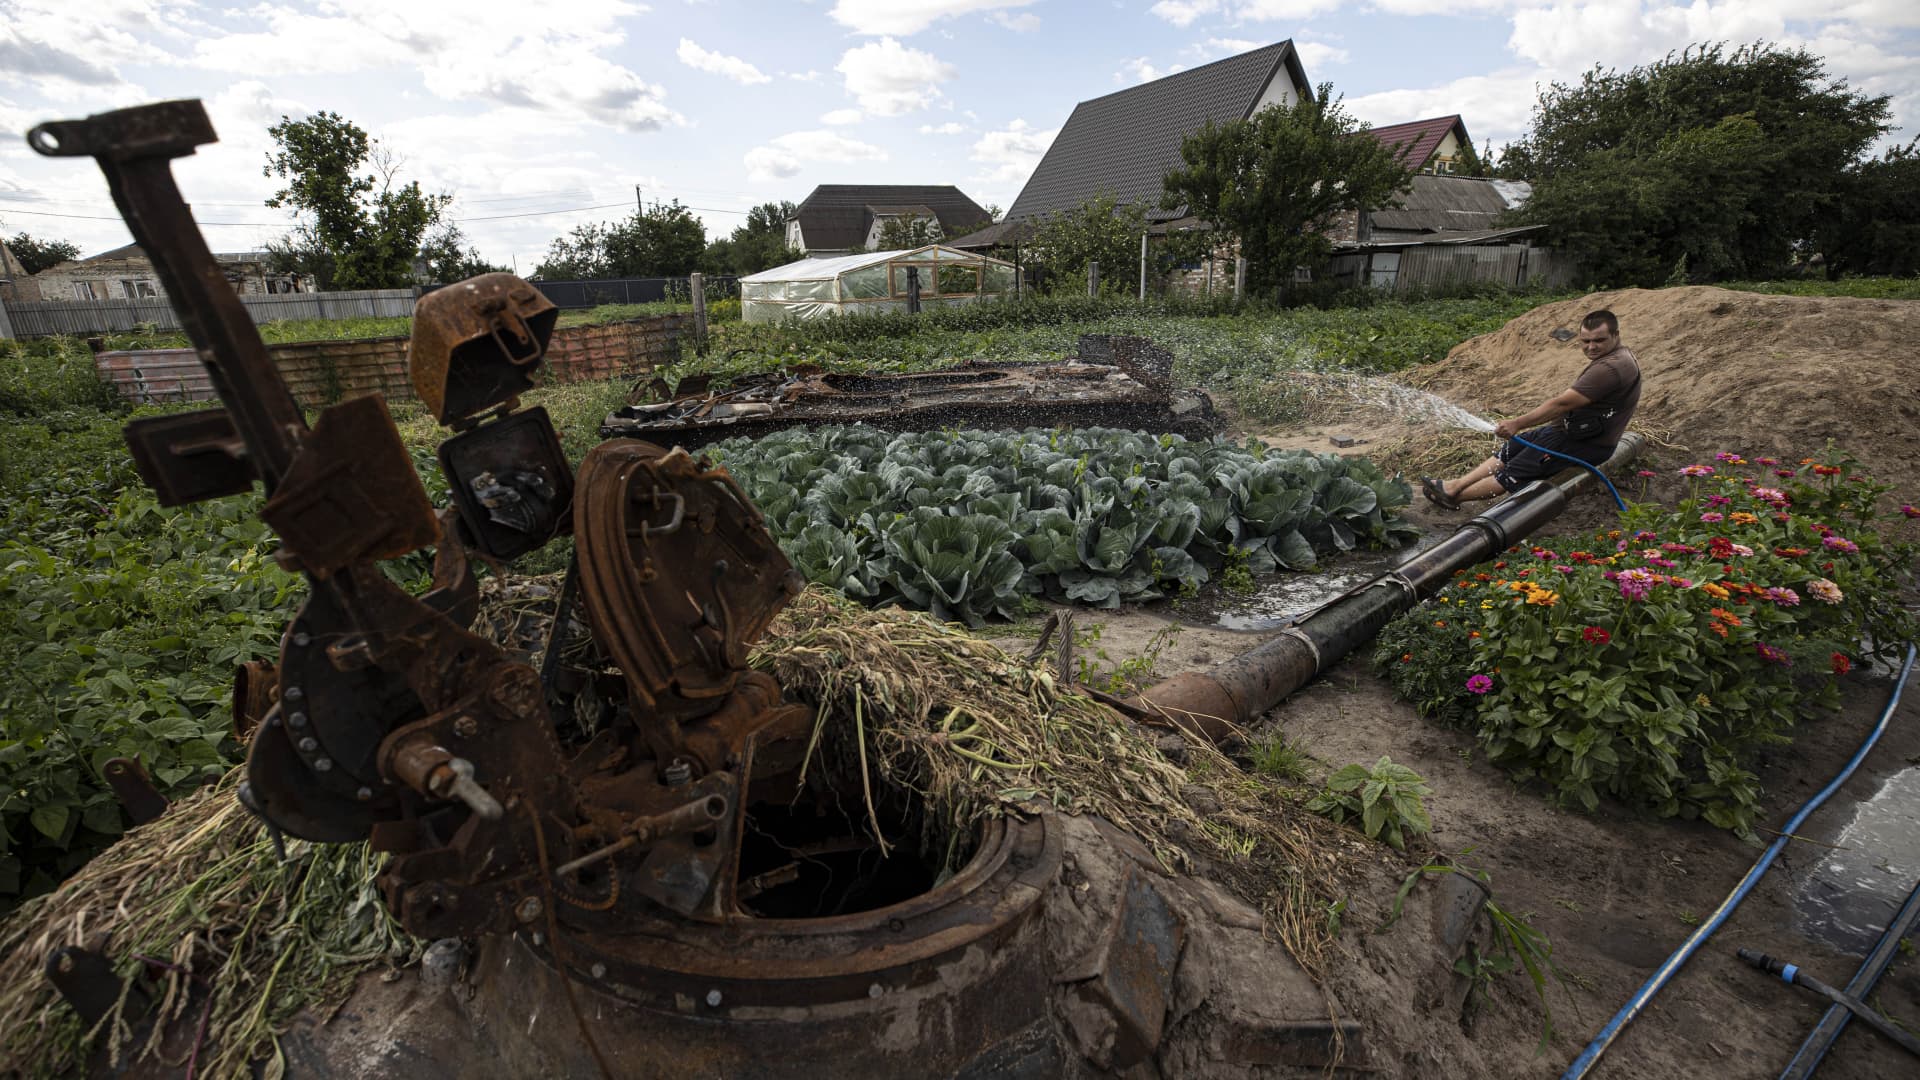 A family grows vegetables in their garden where the wreckage of the tank belonging to the Russian forces is located, in Velyka Dymerka settlement, Kyiv, Ukraine on July 21, 2022. 